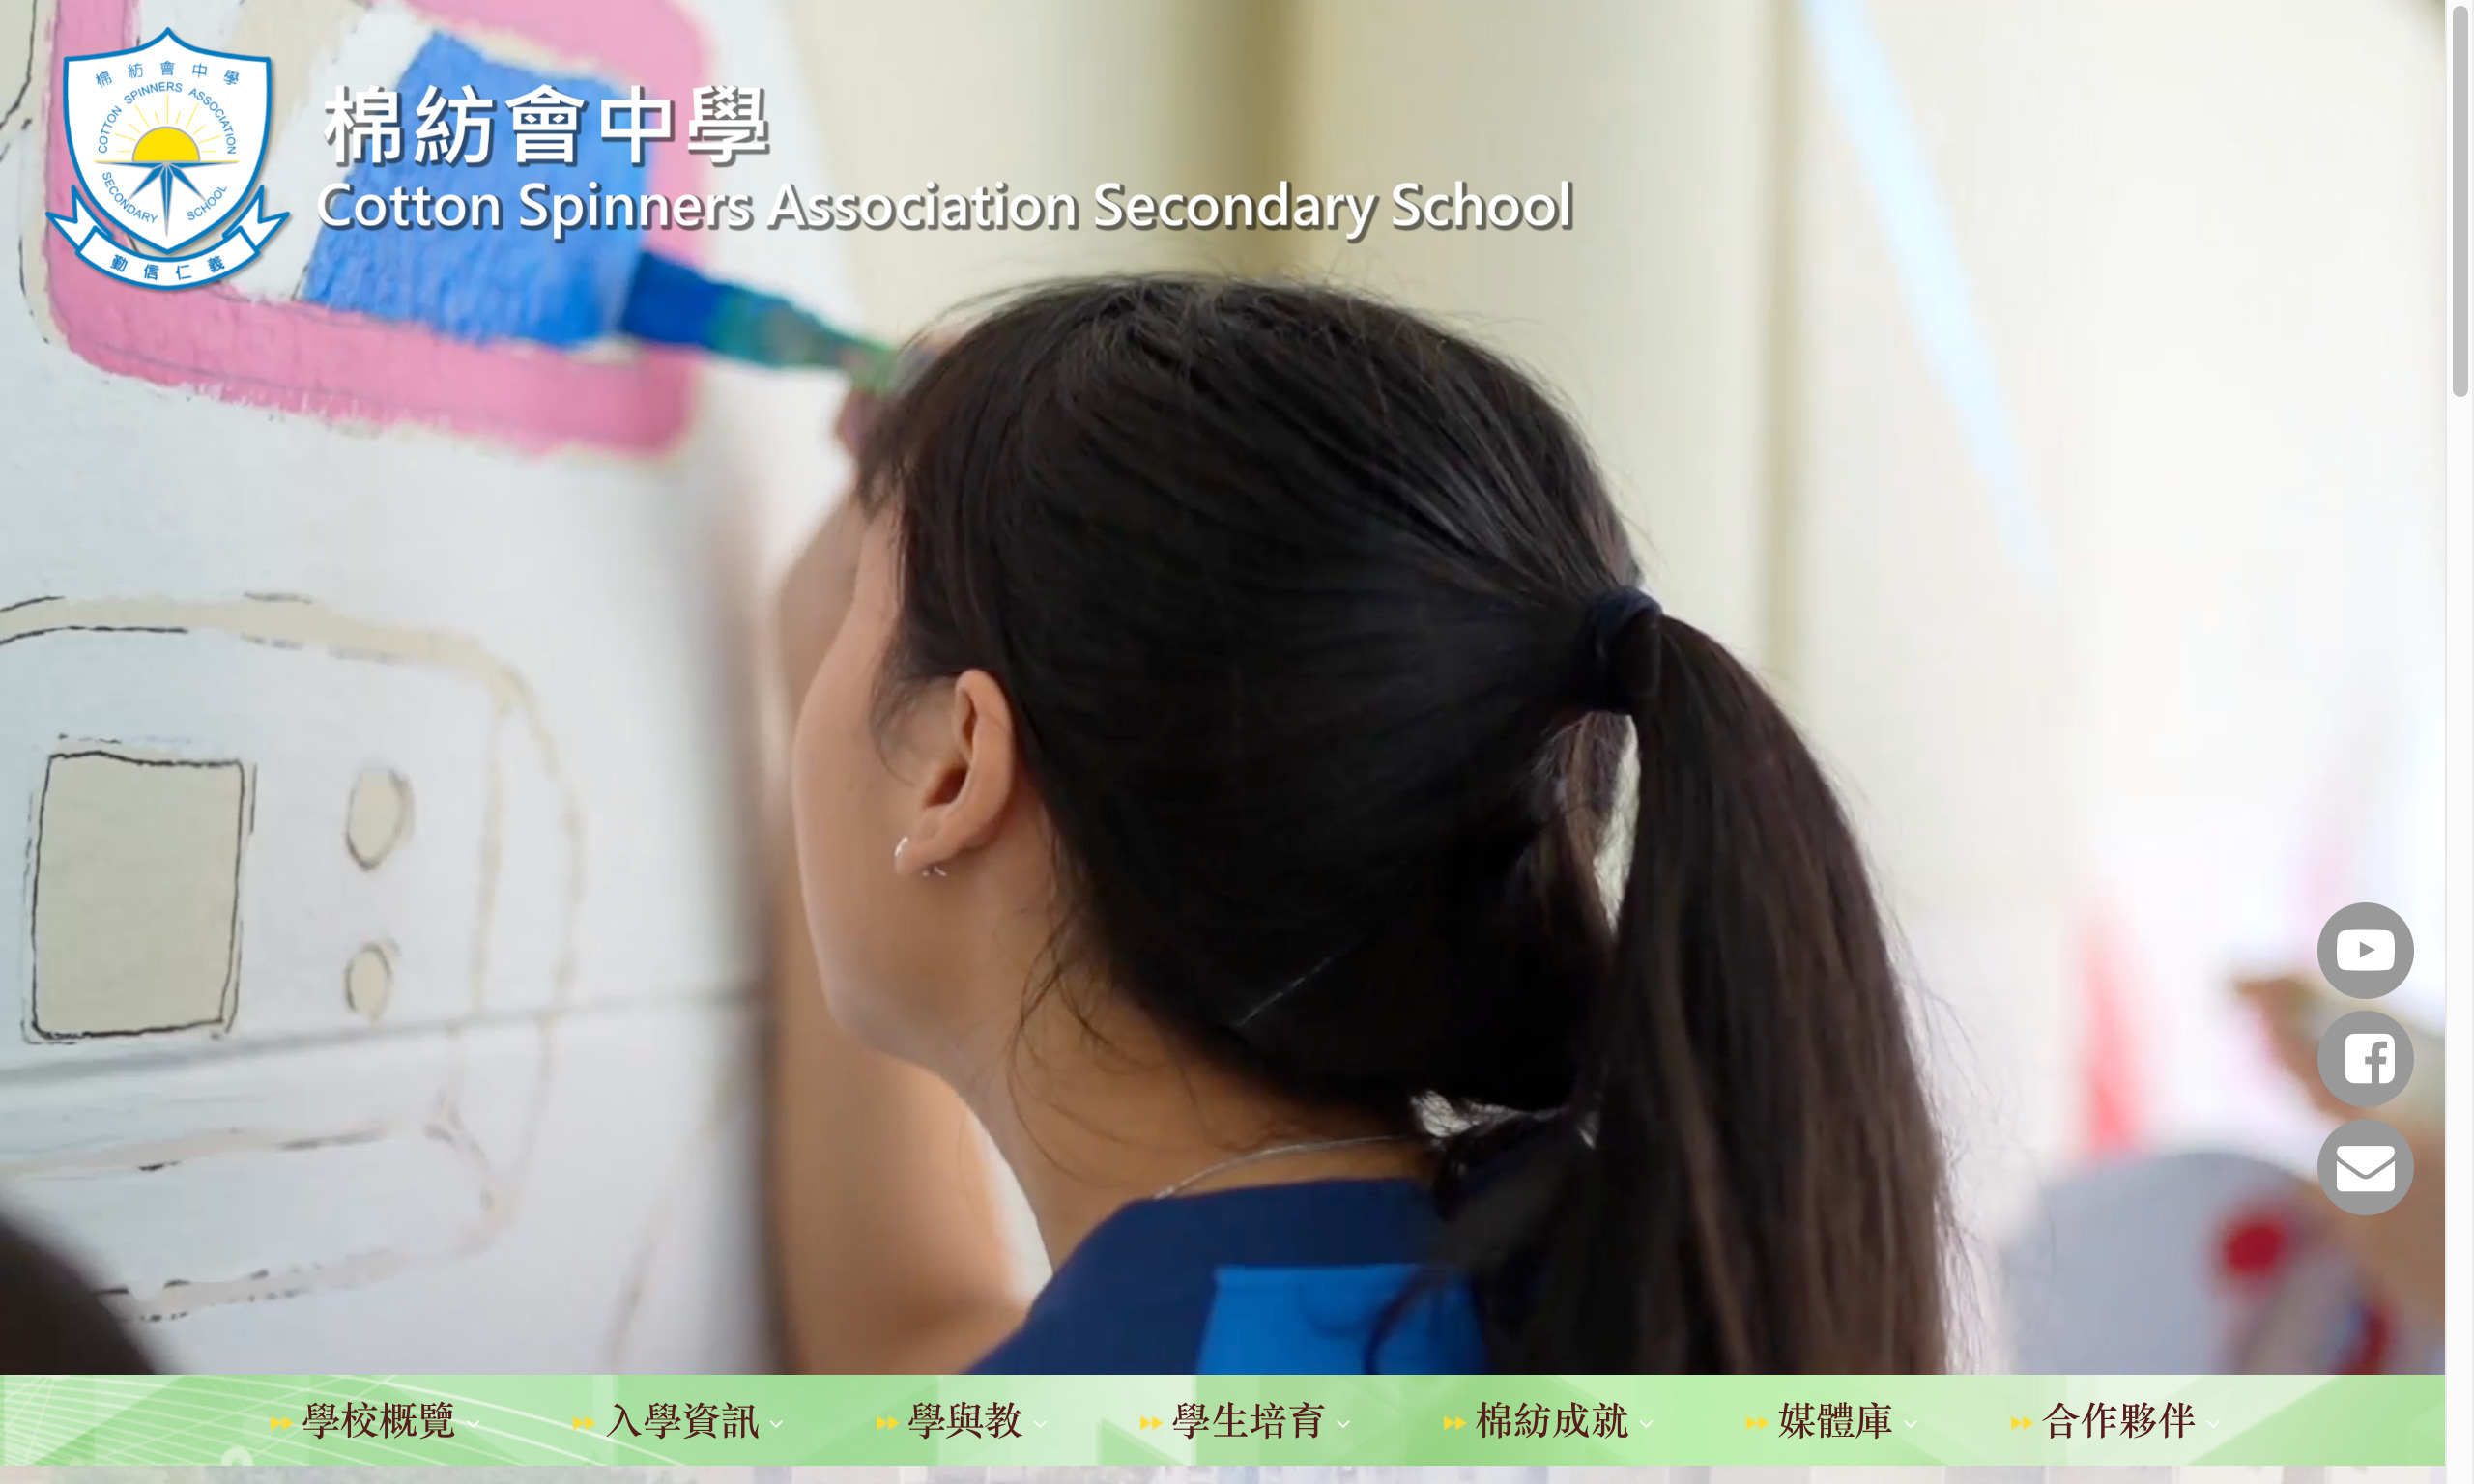 Screenshot of the Home Page of Cotton Spinners Association Secondary School